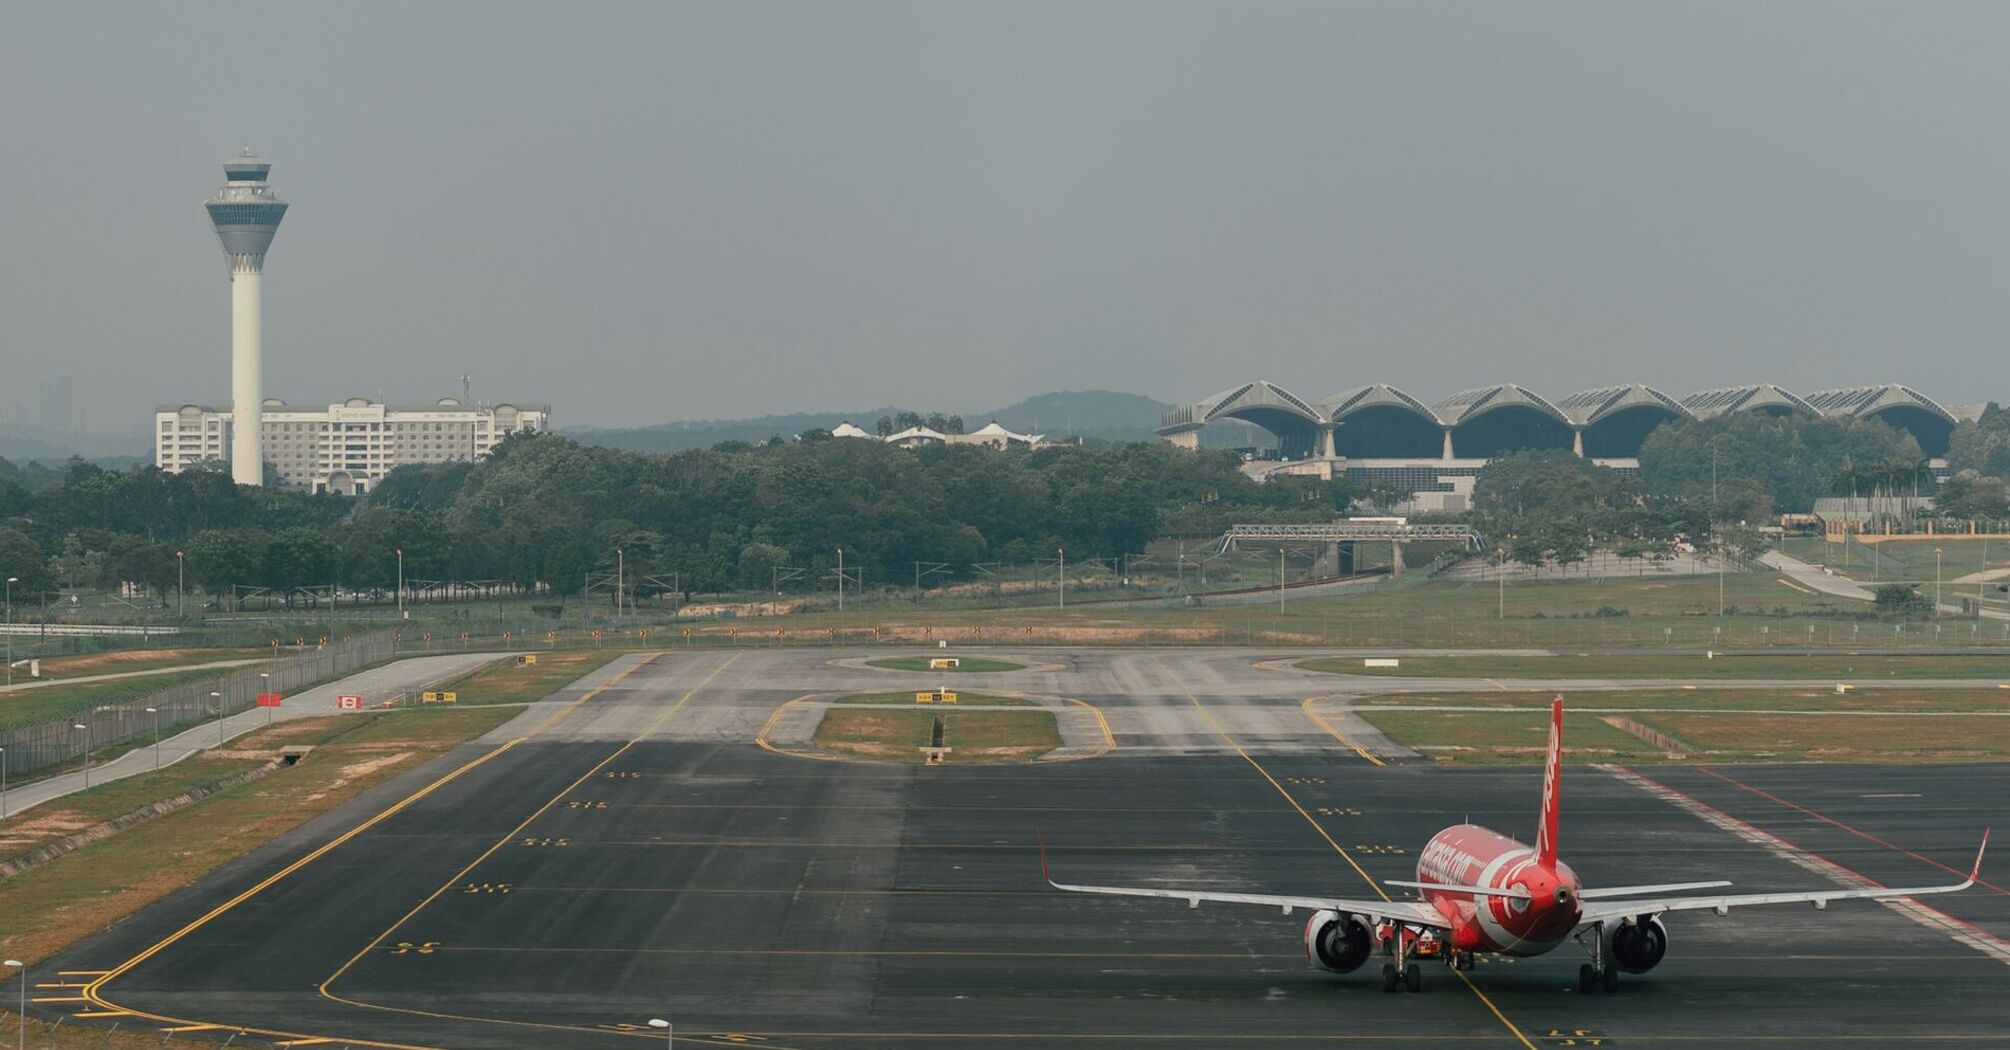 AirAsia airplane on the runway at an airport